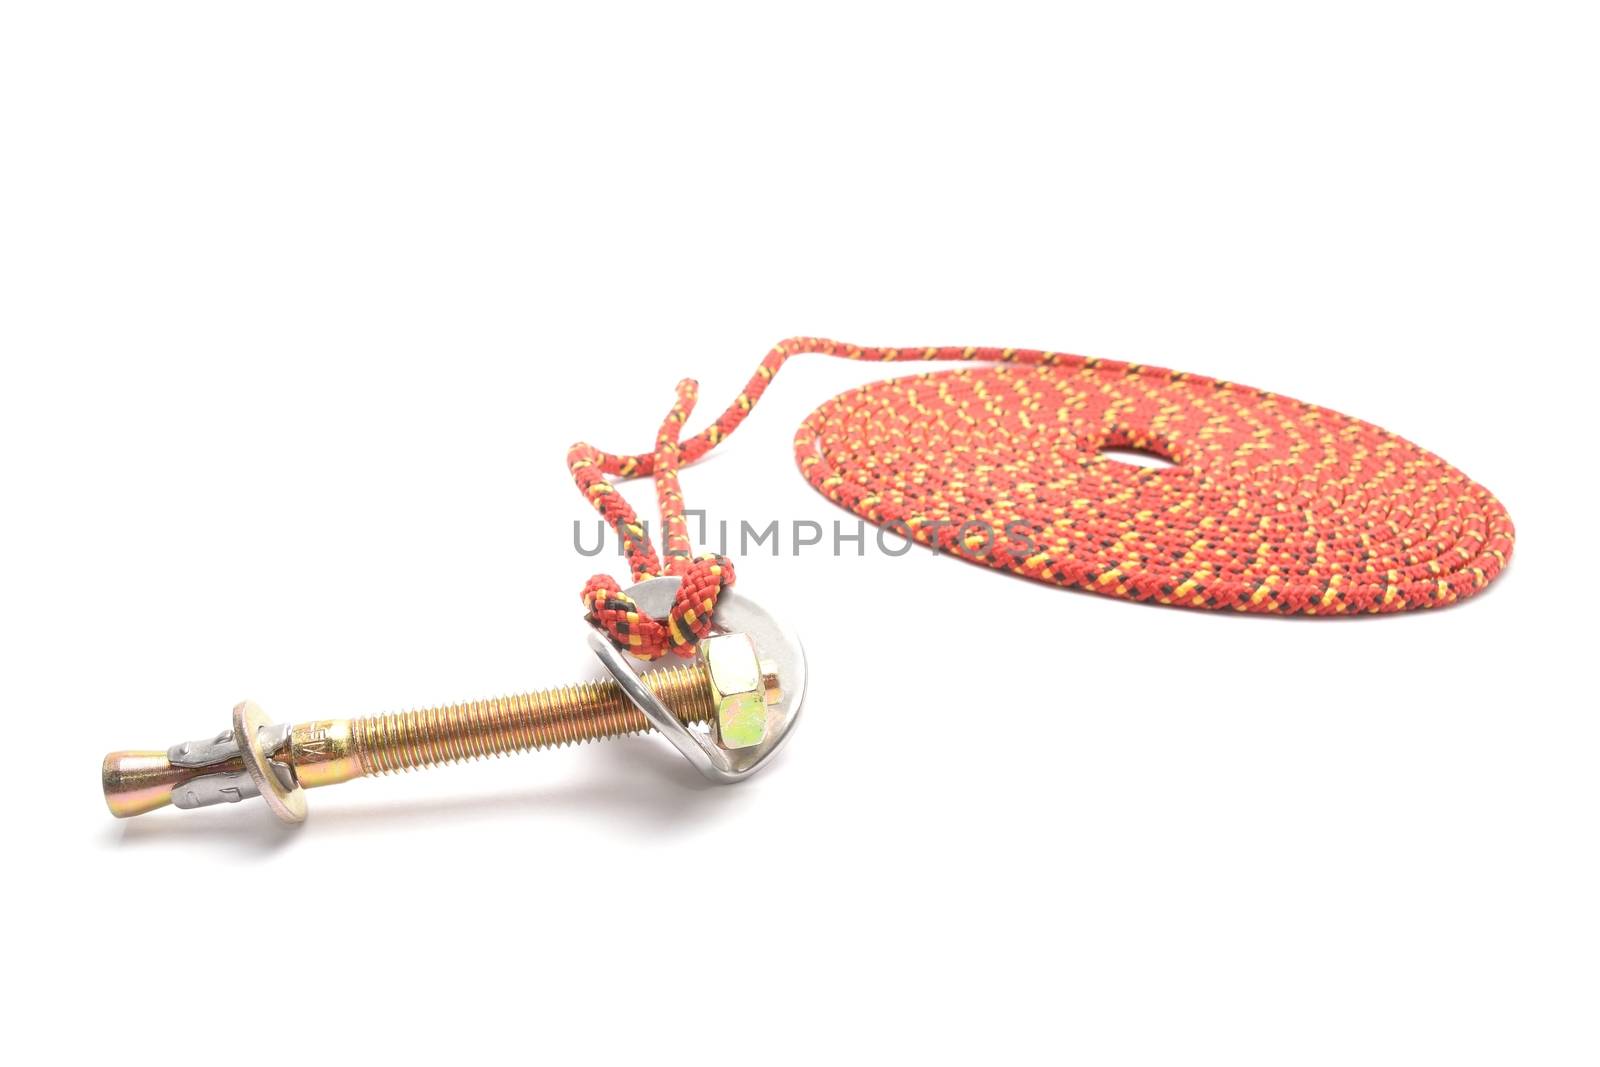 steel anchor eye and rope on white background by comet